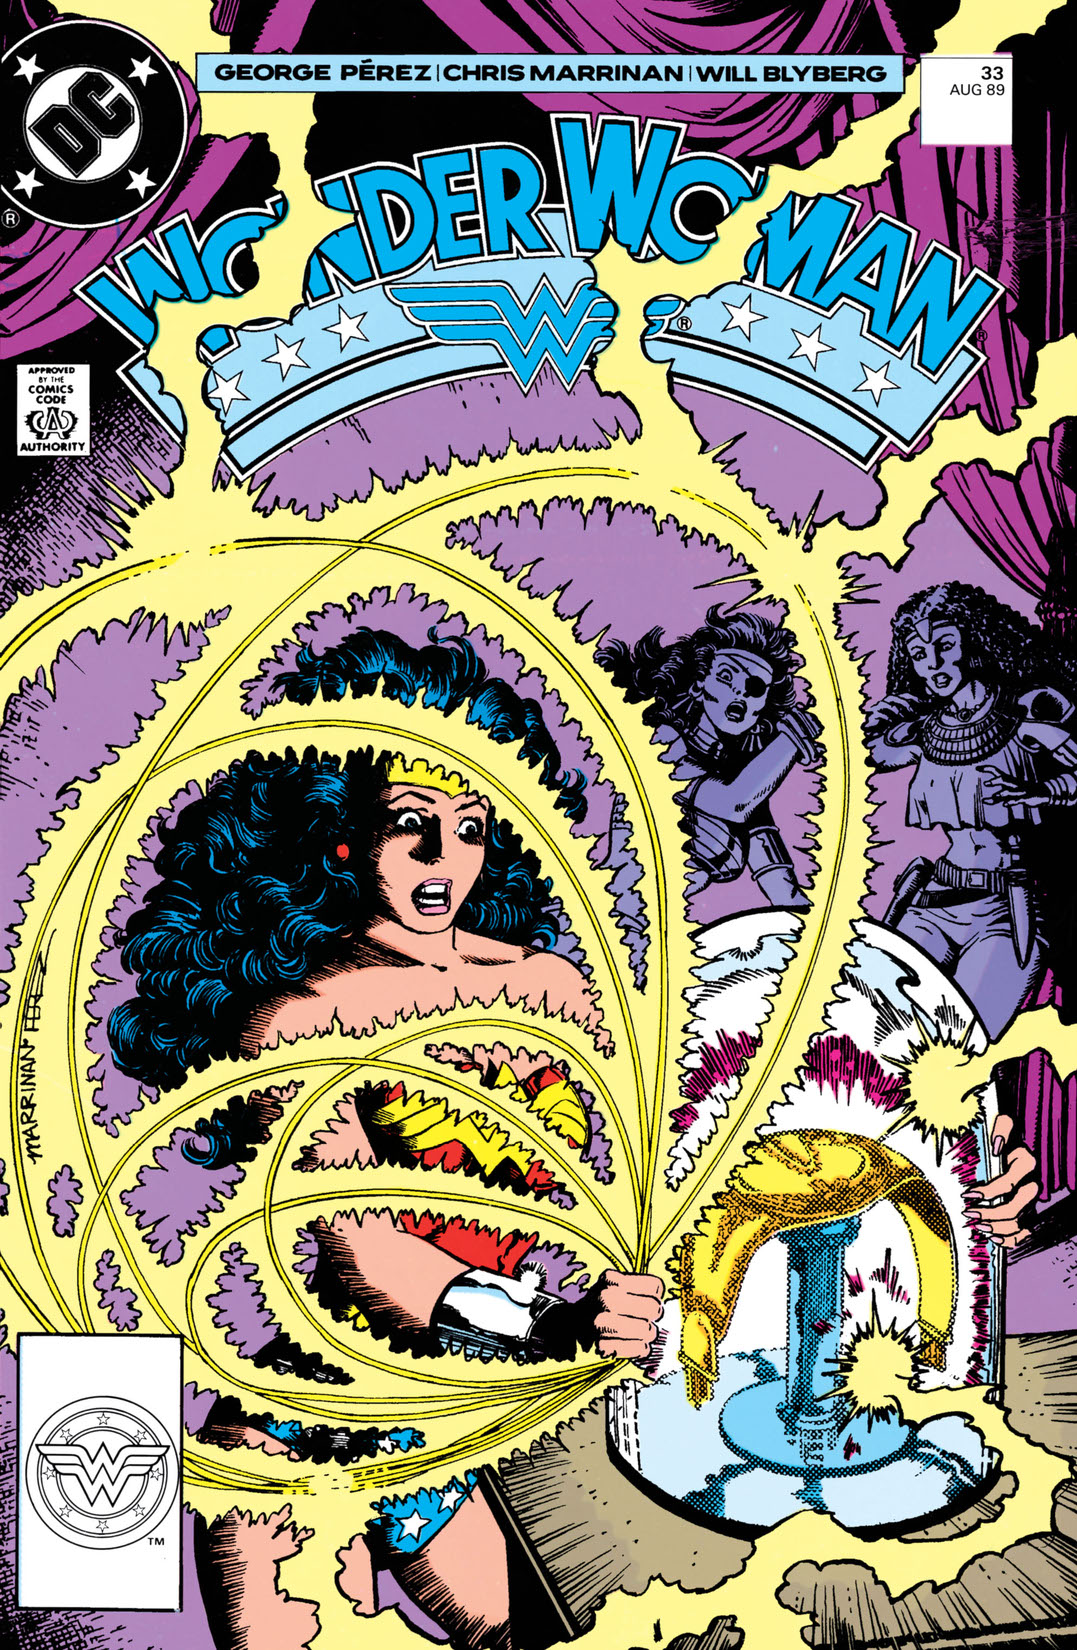 Wonder Woman (1986-2006) #33 preview images